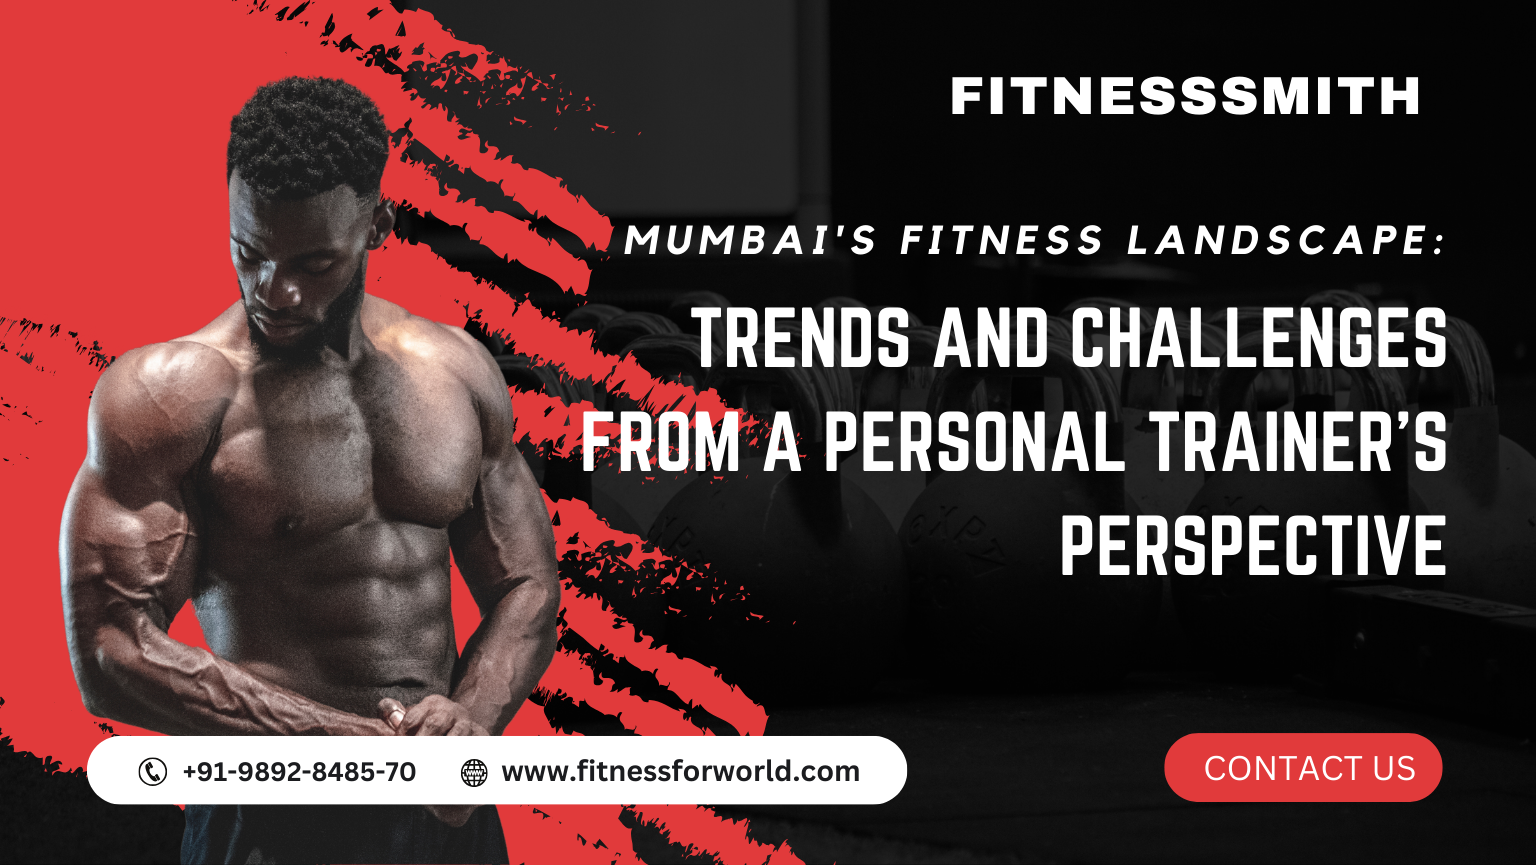 Mumbai’s Fitness Landscape: Trends and Challenges from a Personal Trainer’s Perspective